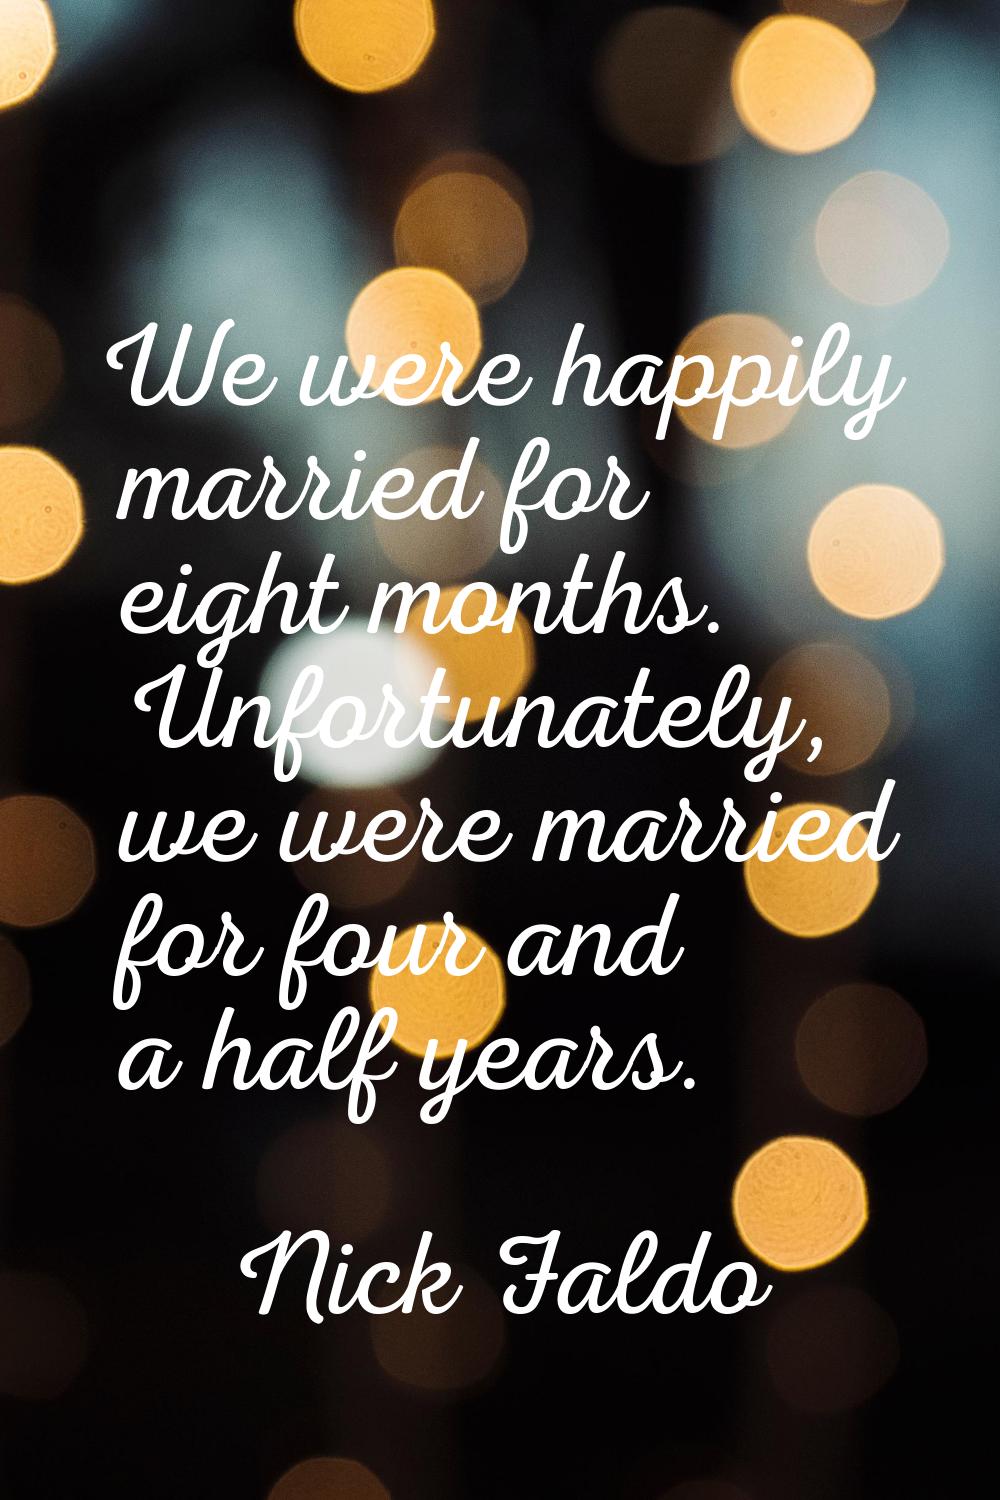 We were happily married for eight months. Unfortunately, we were married for four and a half years.